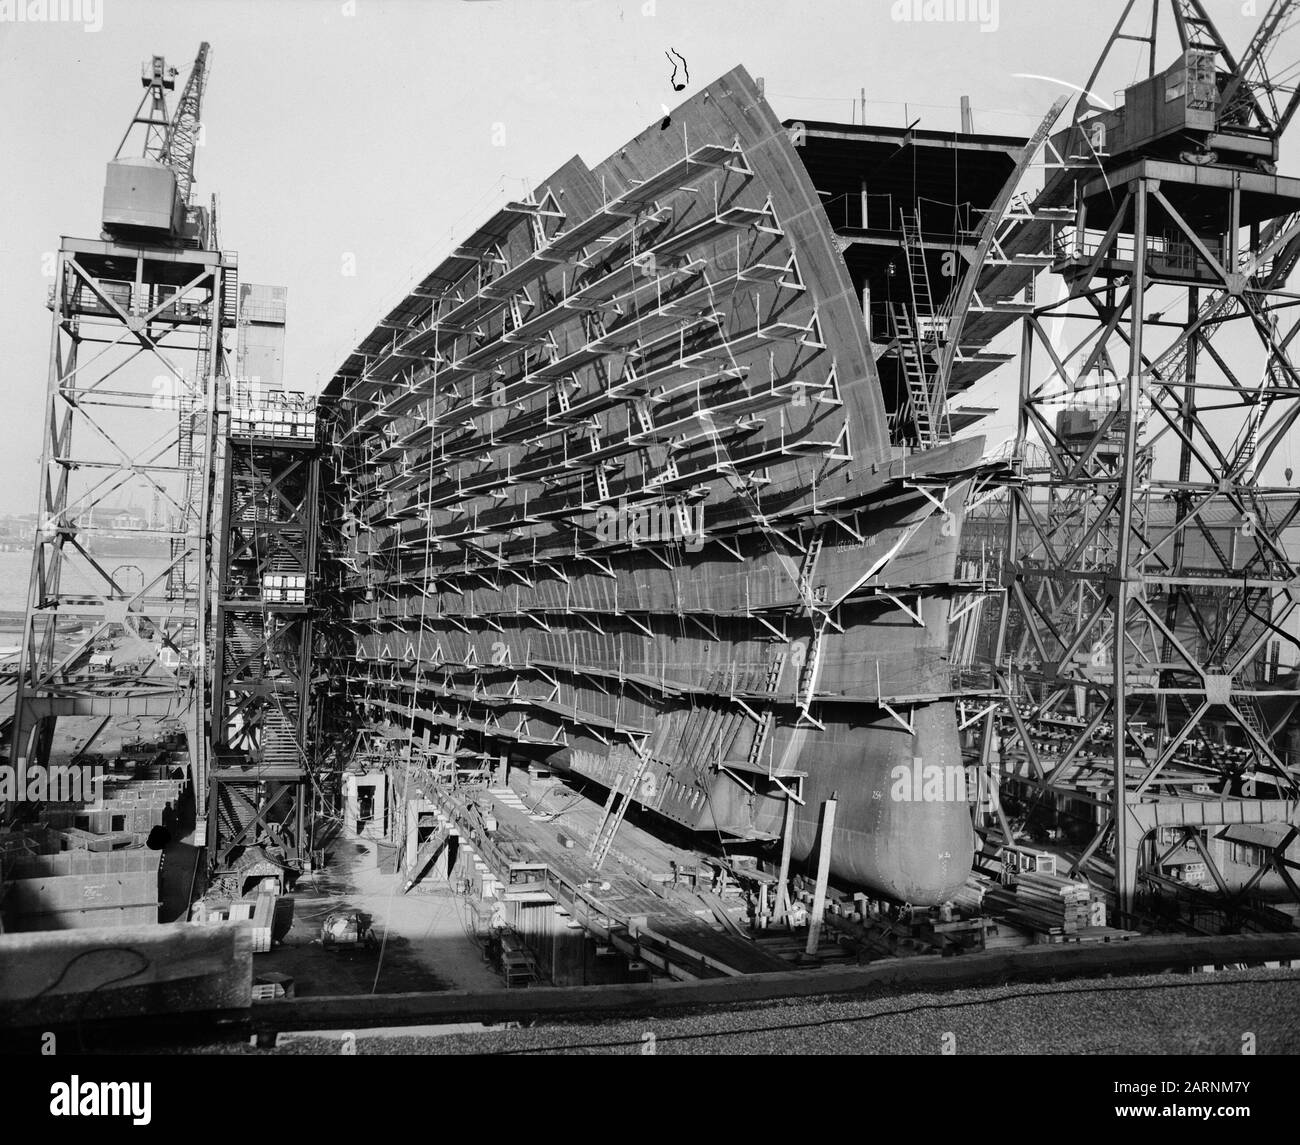 The flagship of the H.A.L. de Rotterdam under construction Date: 11 December 1957 Keywords: extension, flagships Person name: H.A.l. ' de Rotterdam' Institution name: RDM Stock Photo